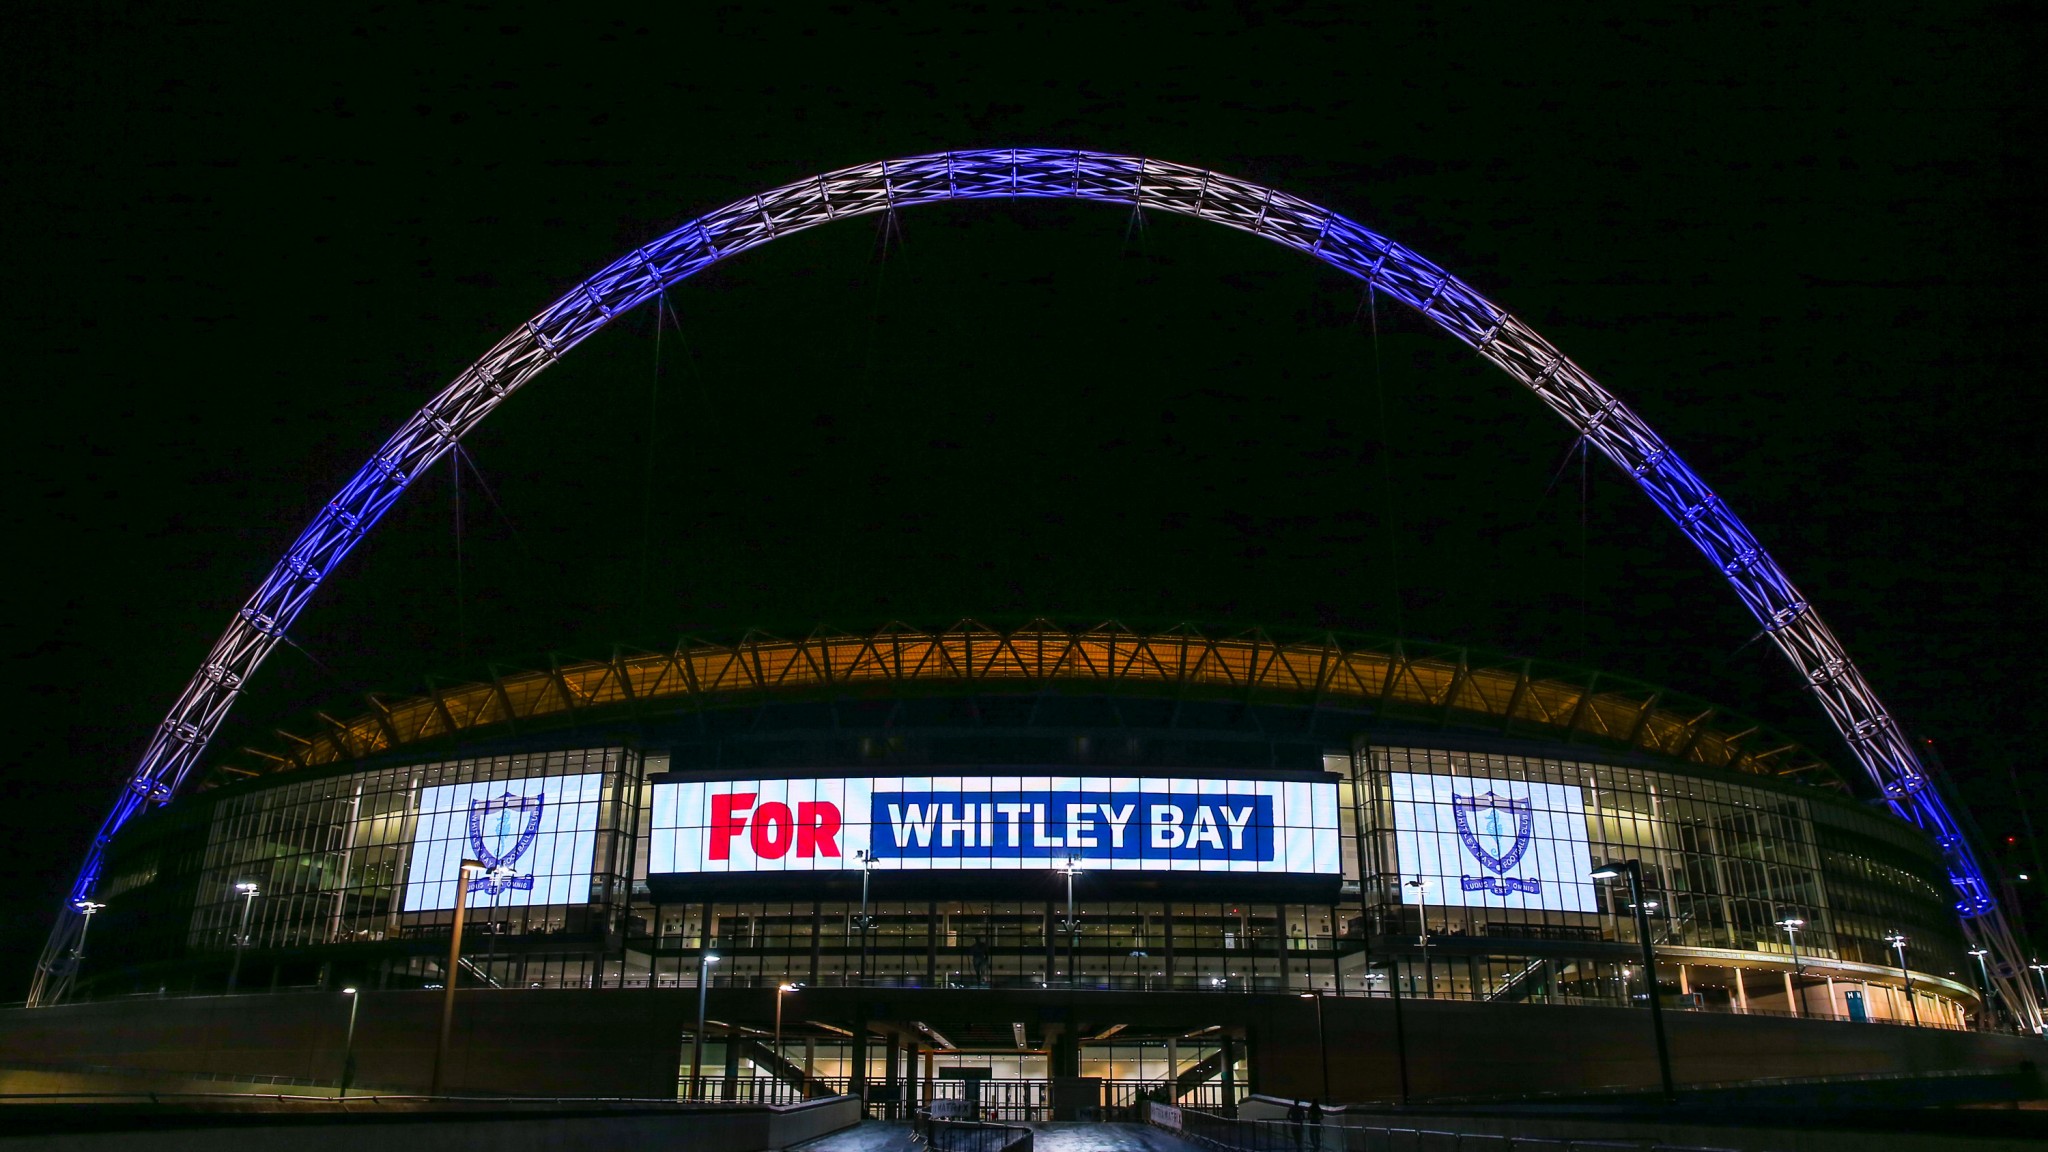 Virtual FA Cup Final tickets now on sale!